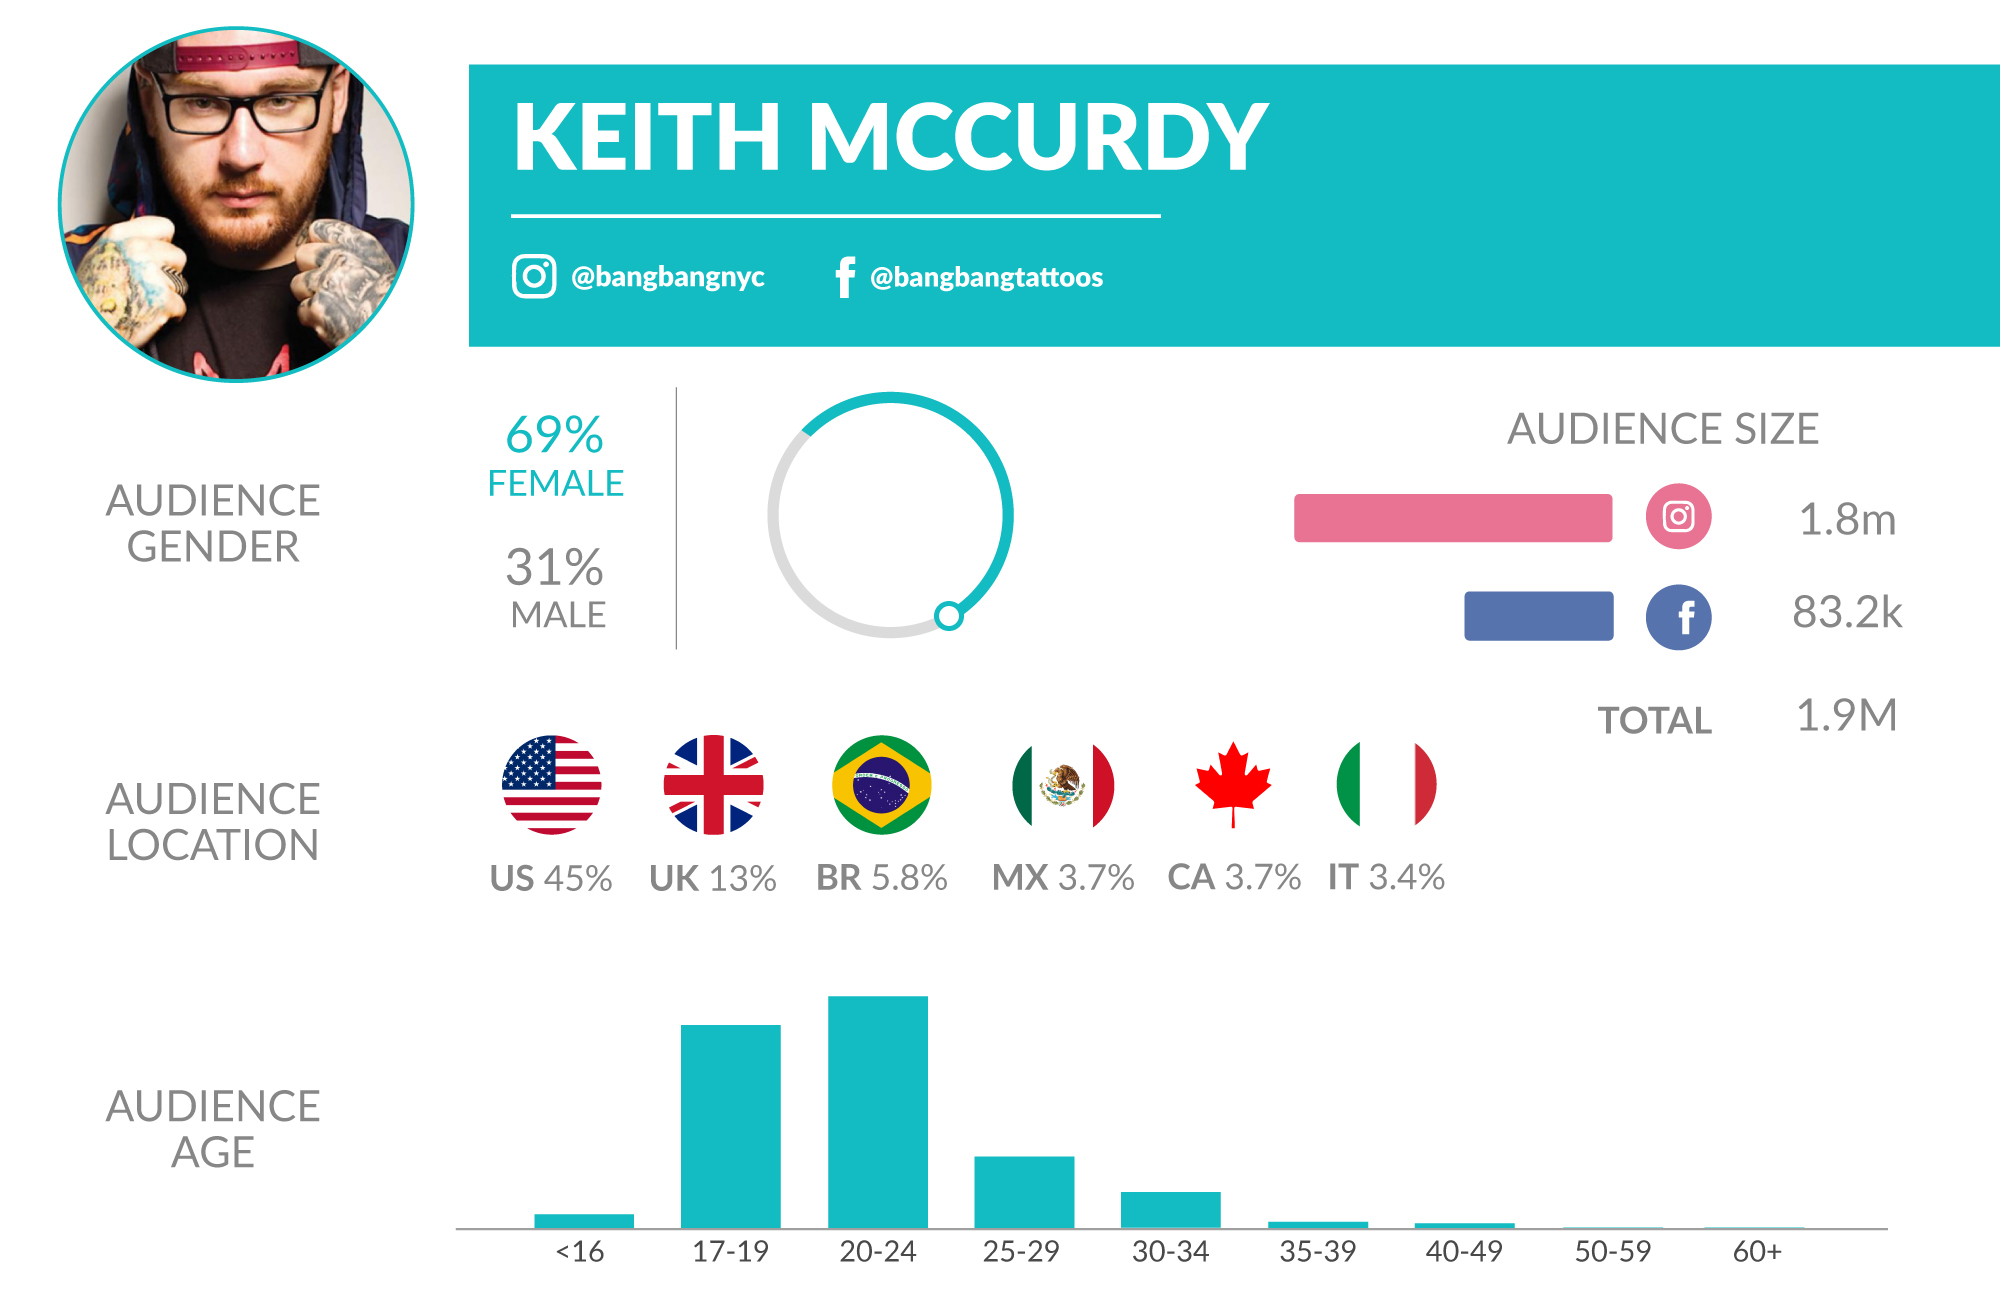 keith mccurdy is amazing at what he does and has worked with various celebrities such as rihanna miley cyrus justin bieber kylie jenner - kylie jenner number of instagram followers